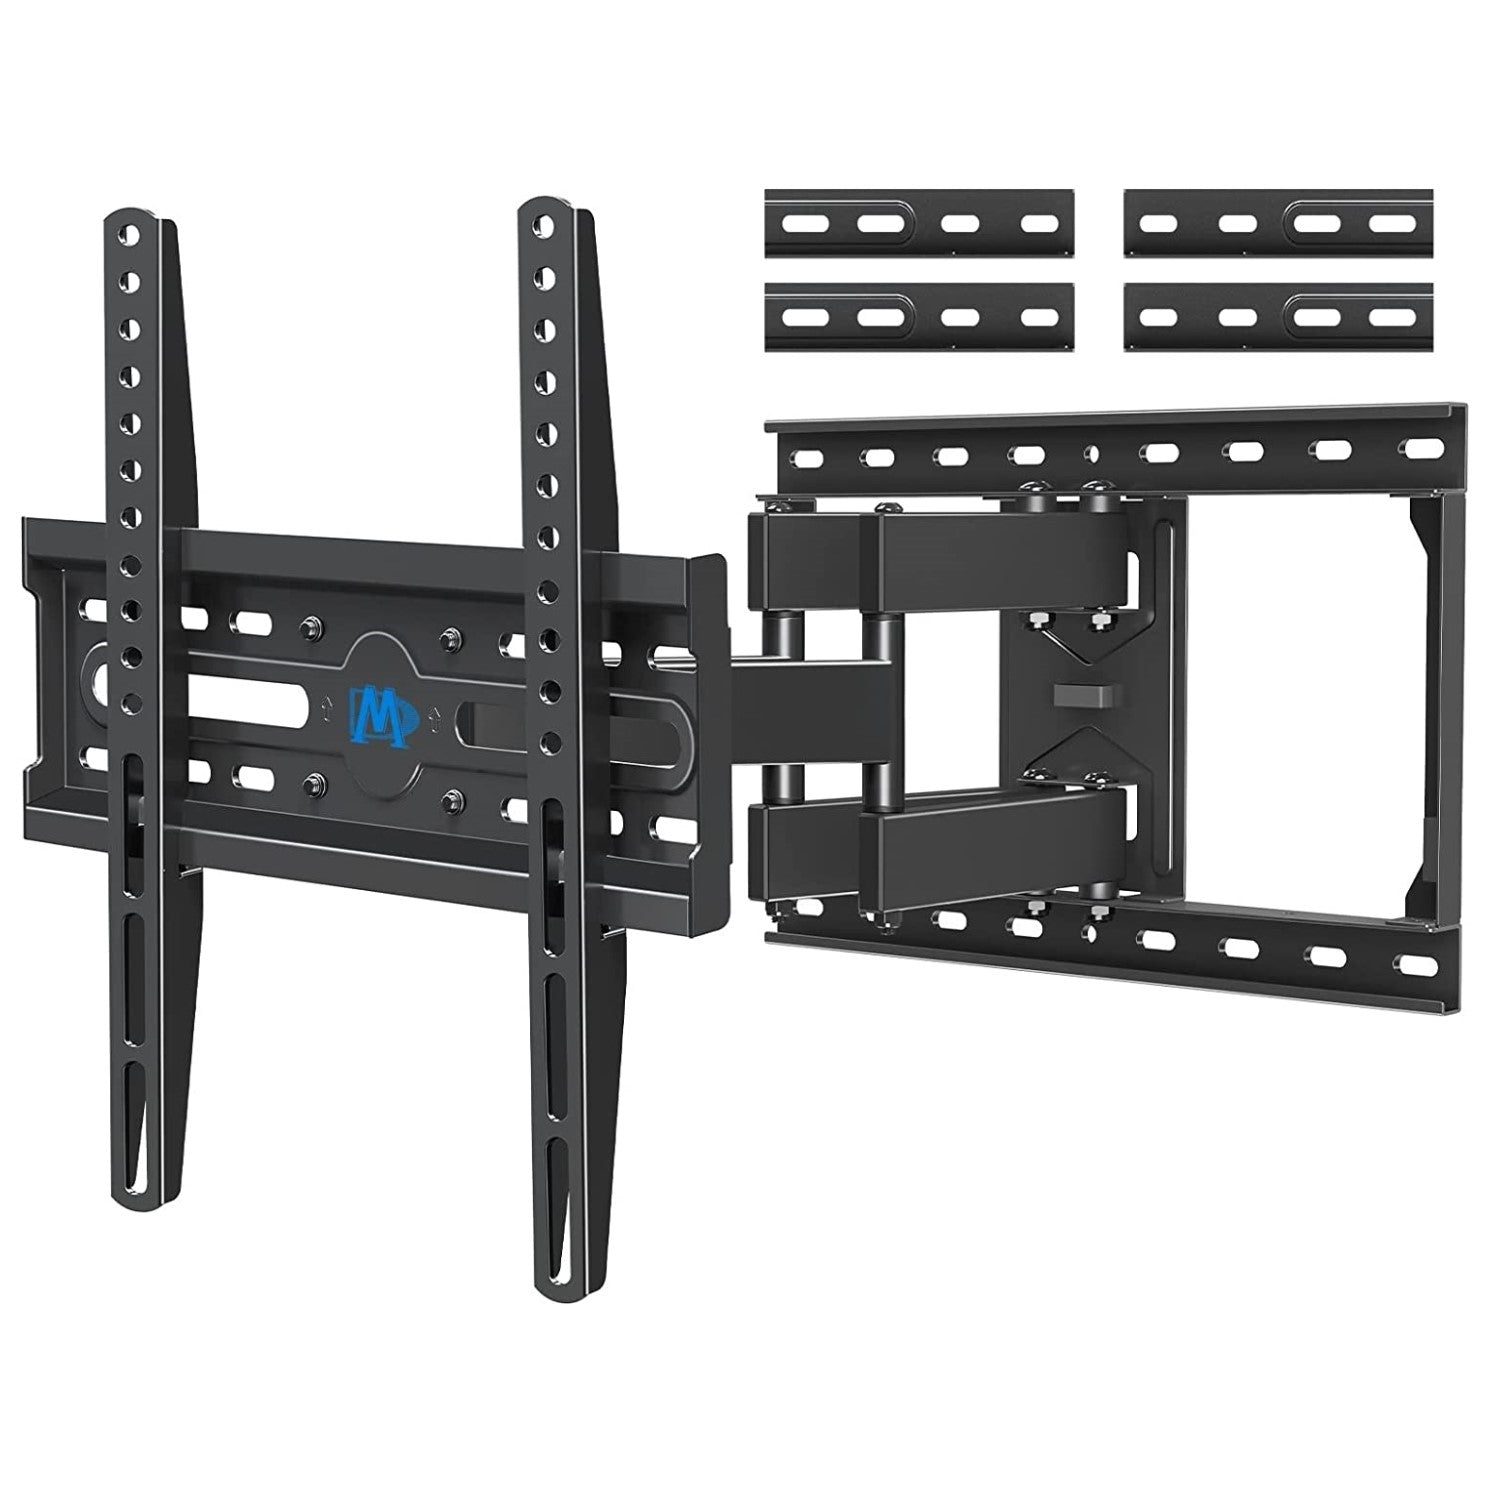 Full Motion TV Wall Mount for 26-55" Flat Screen TV up to 24'' Wood Studs Mounting Dream MD2380-24K